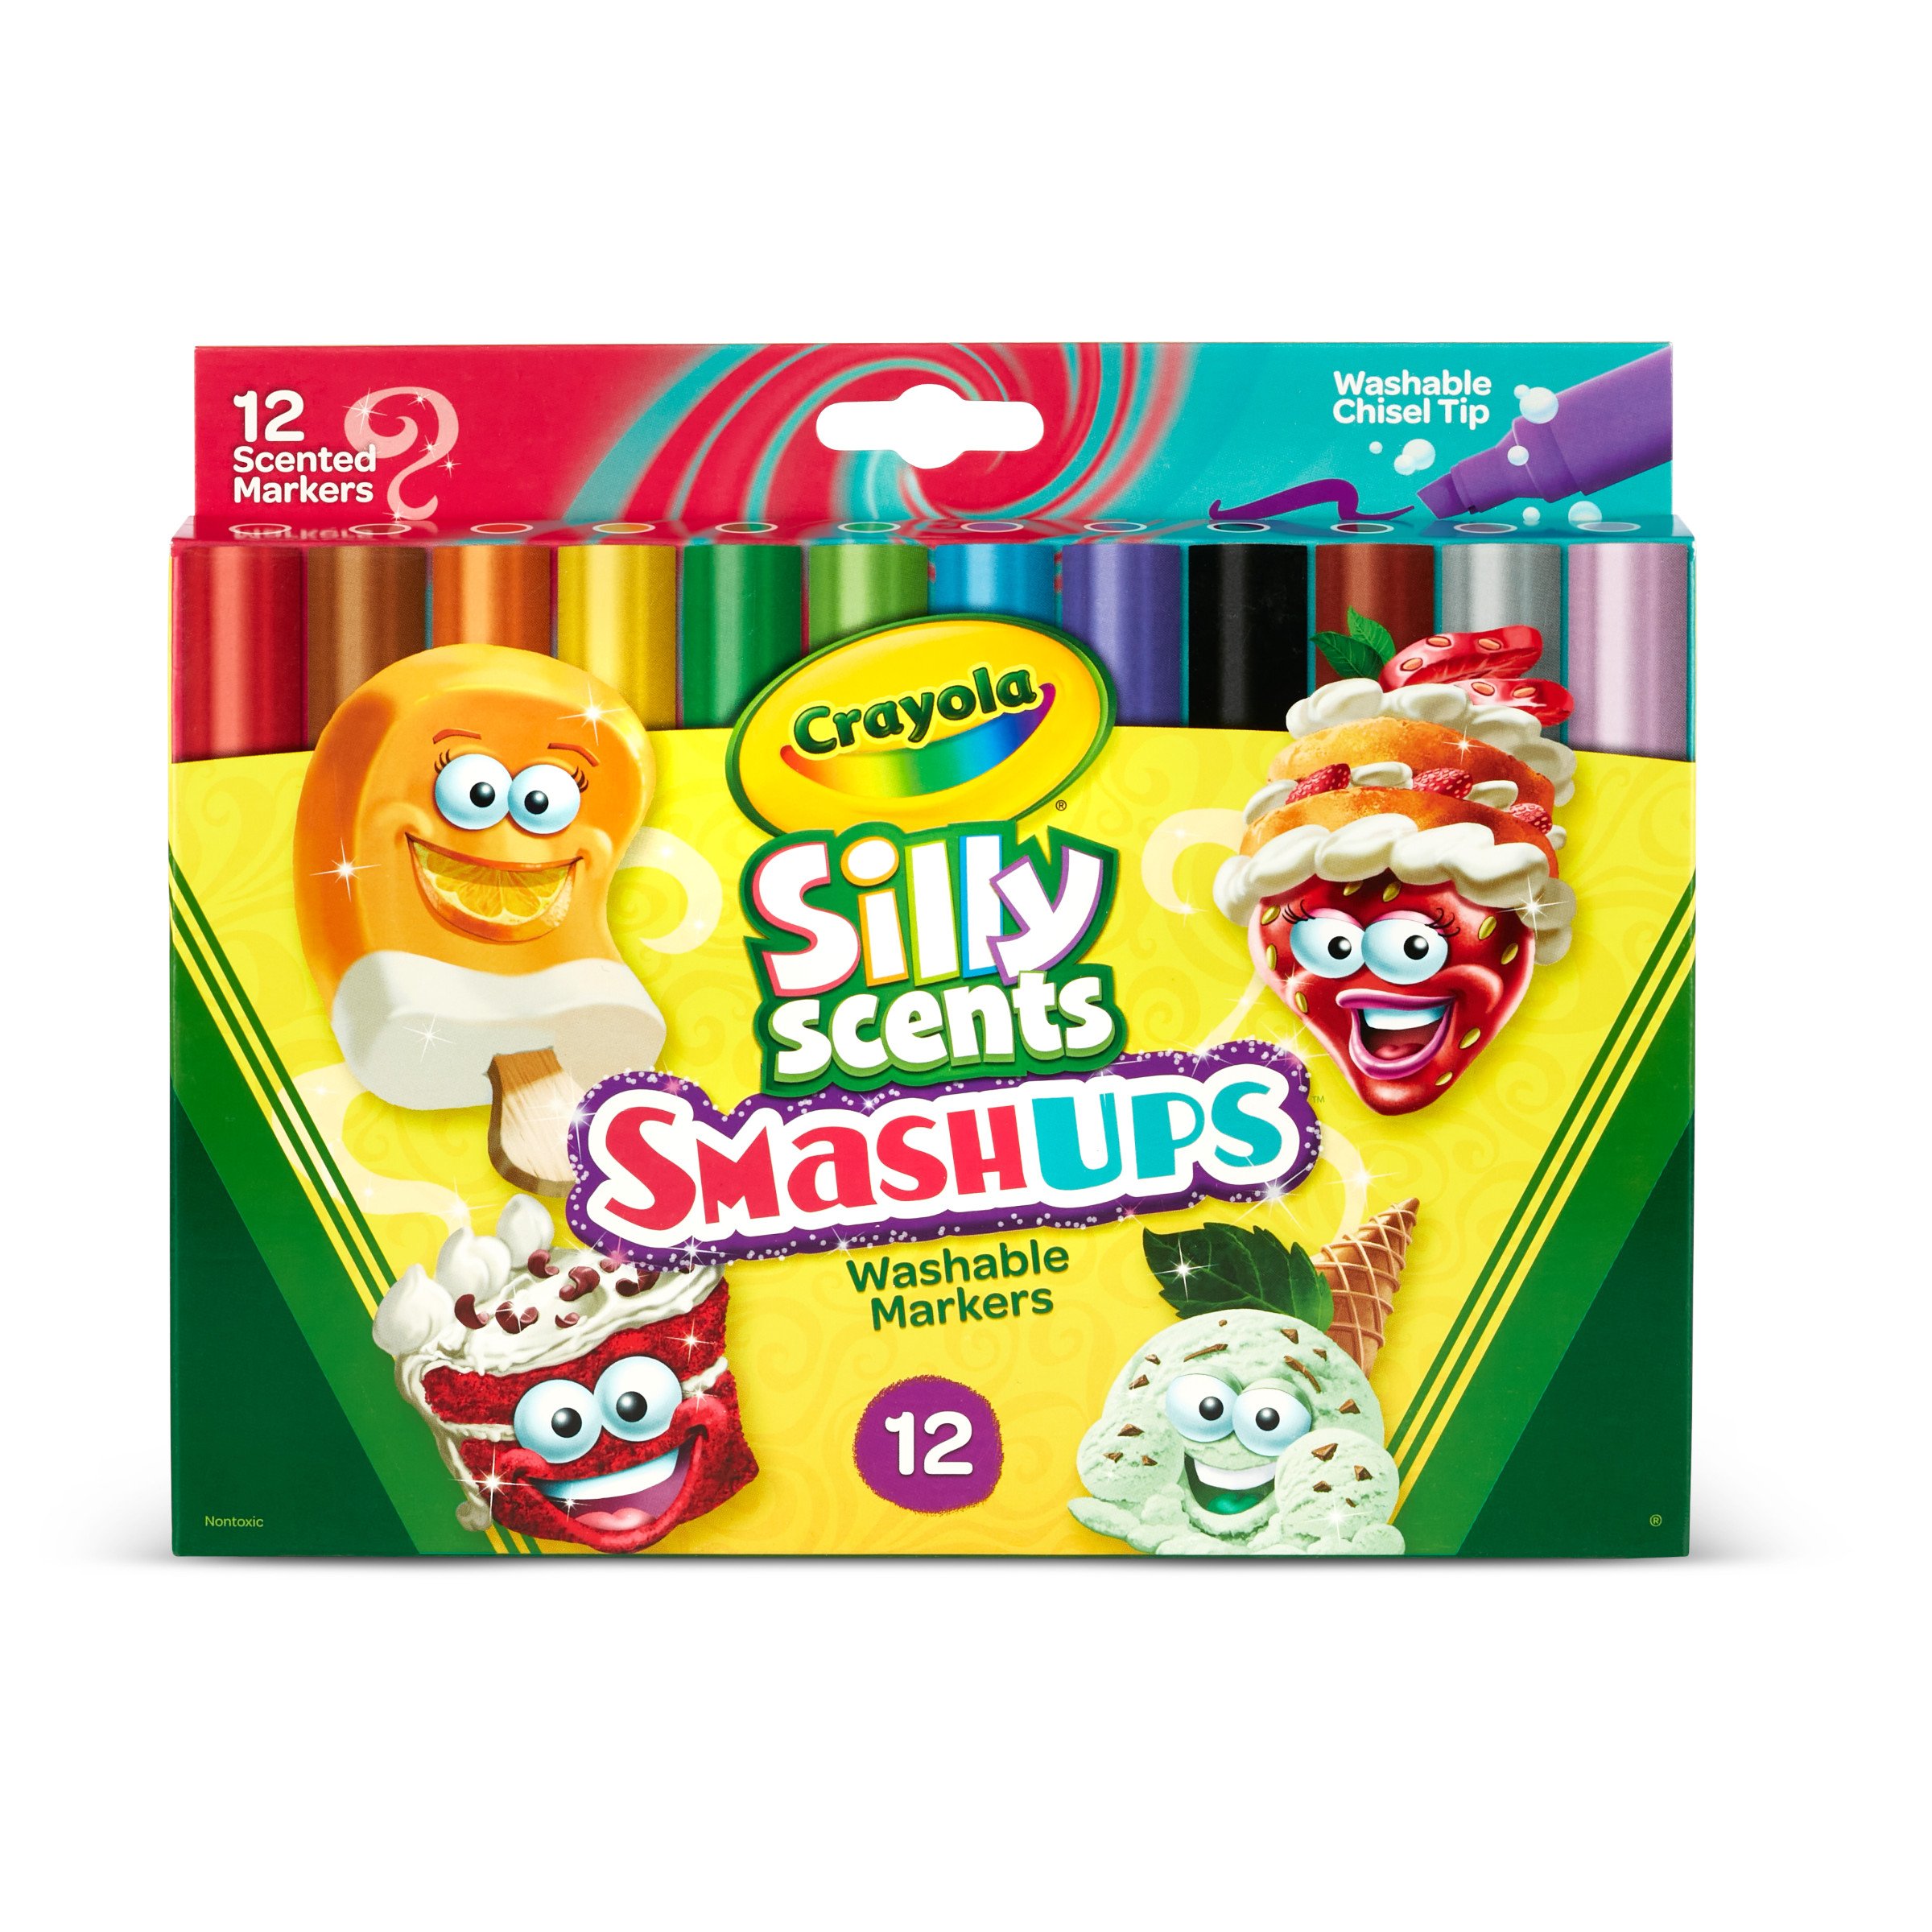 Crayola Silly Scents Smash Ups Washable Markers - Shop Highlighters &  Dry-Erase at H-E-B